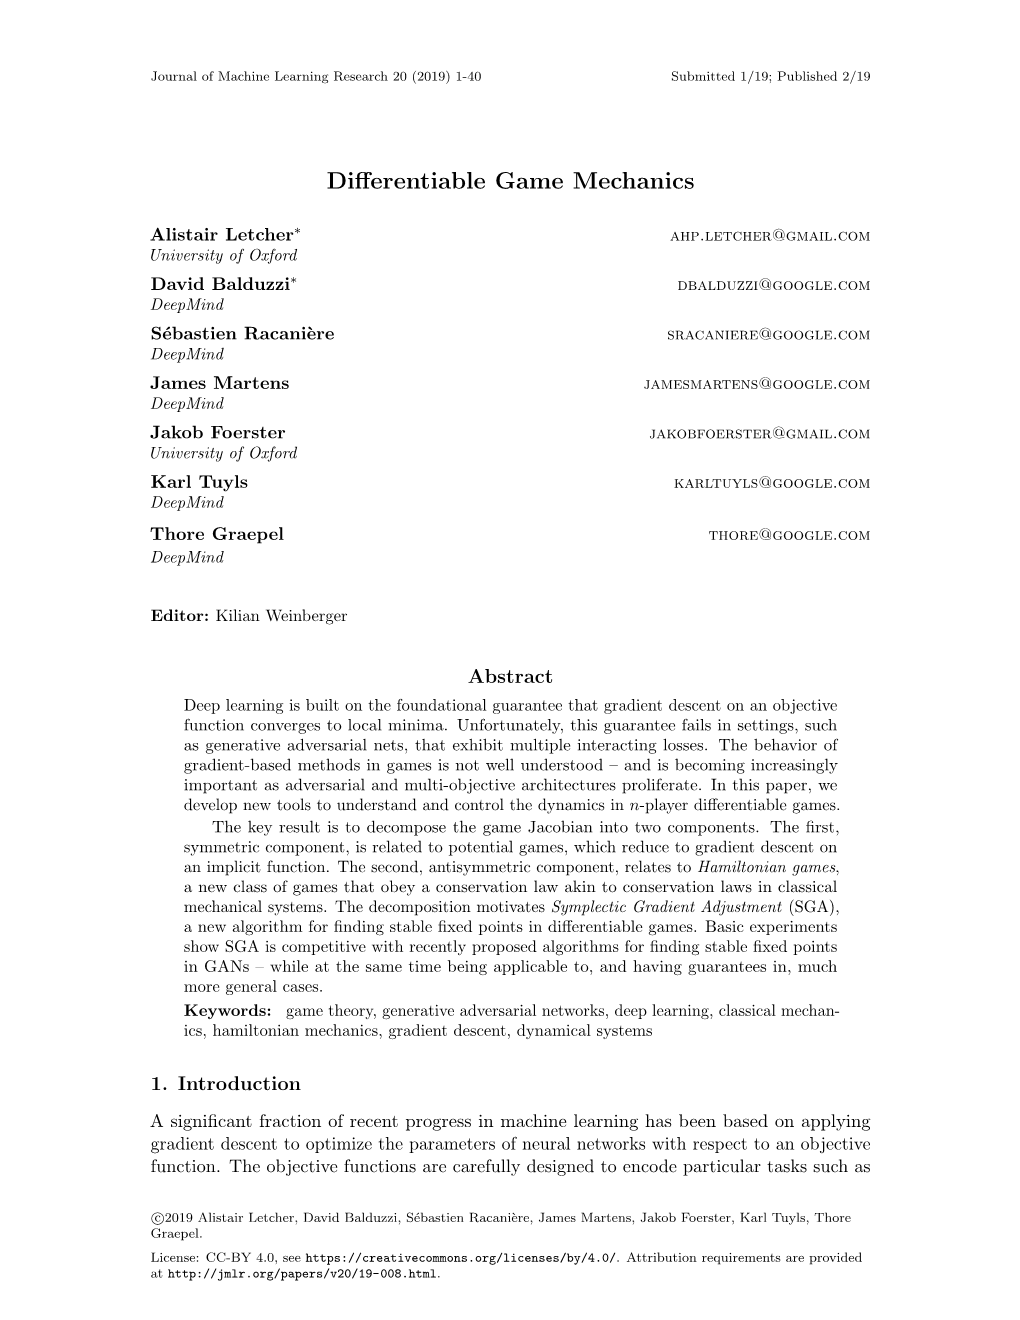 Differentiable Game Mechanics